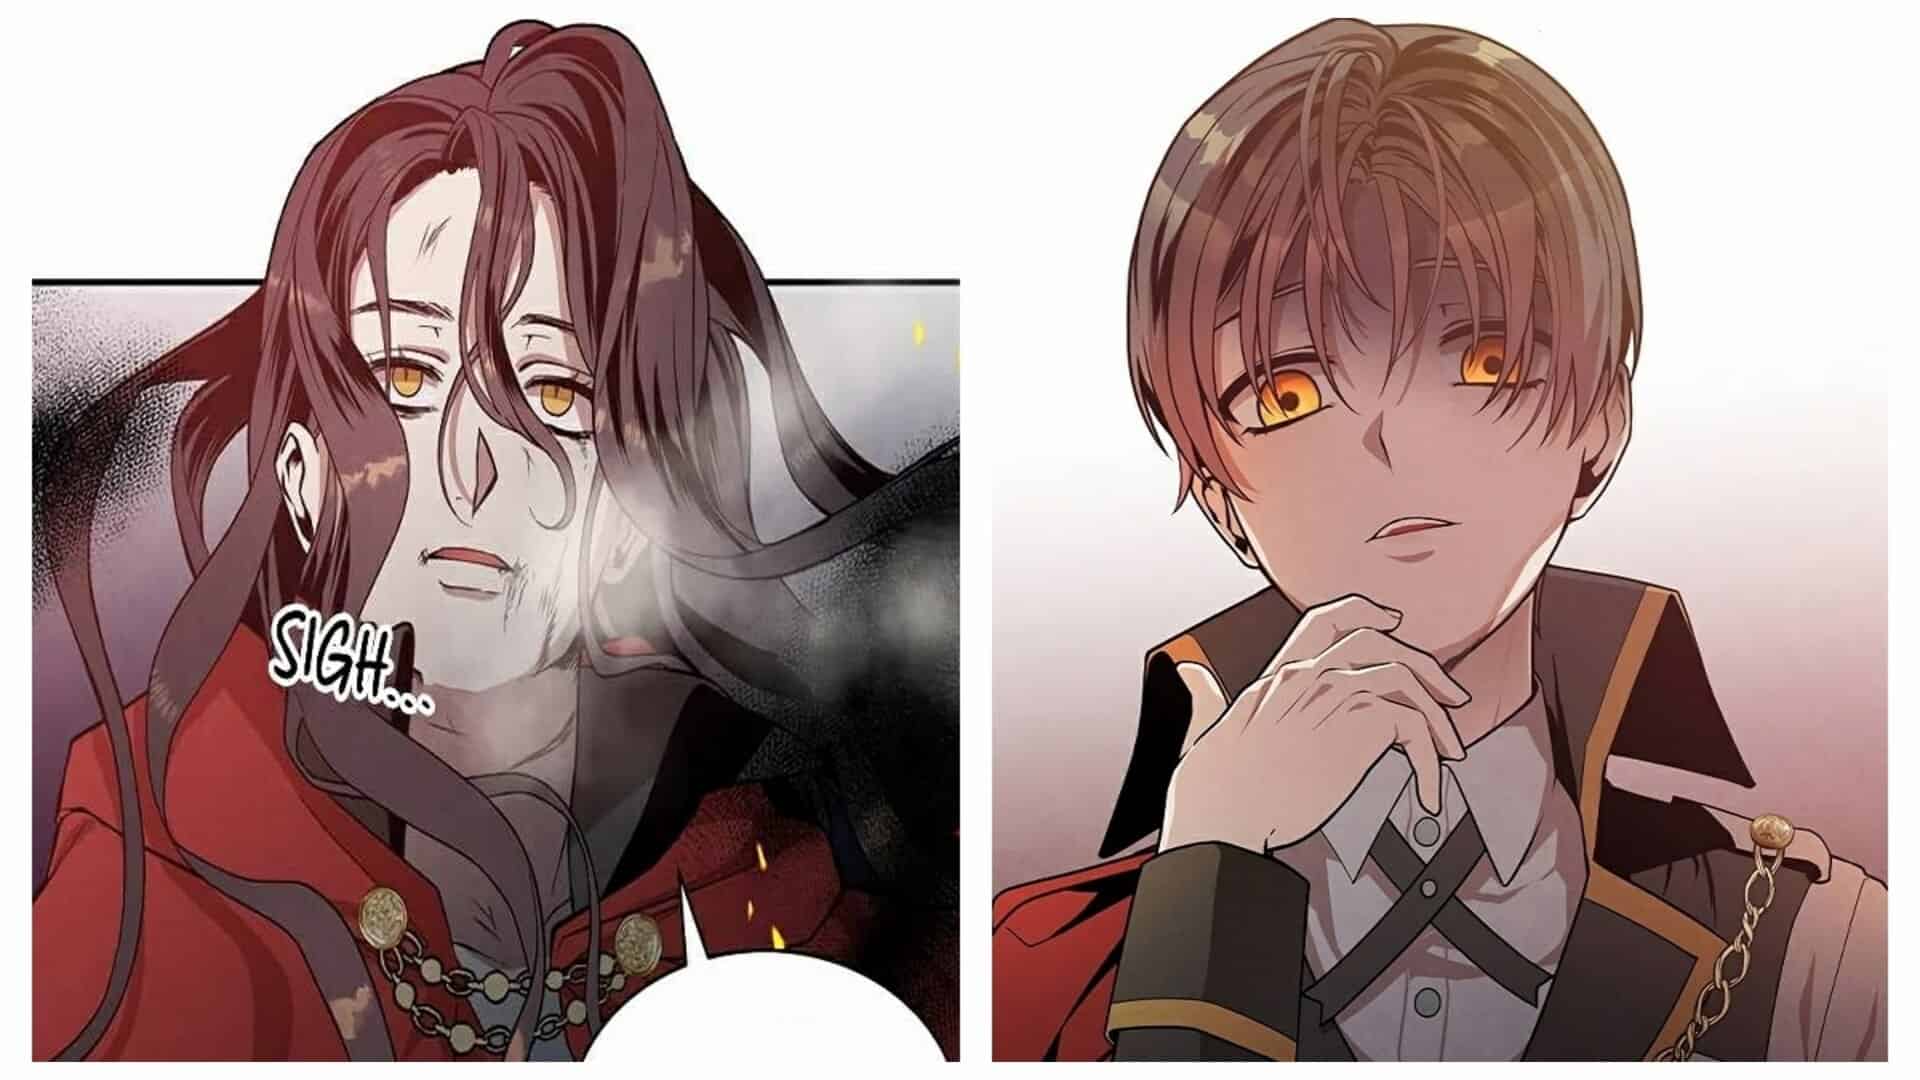 Jack Valantier Before And After Regression - Legendary Youngest Son Of The Marquis House Chapters 1&5